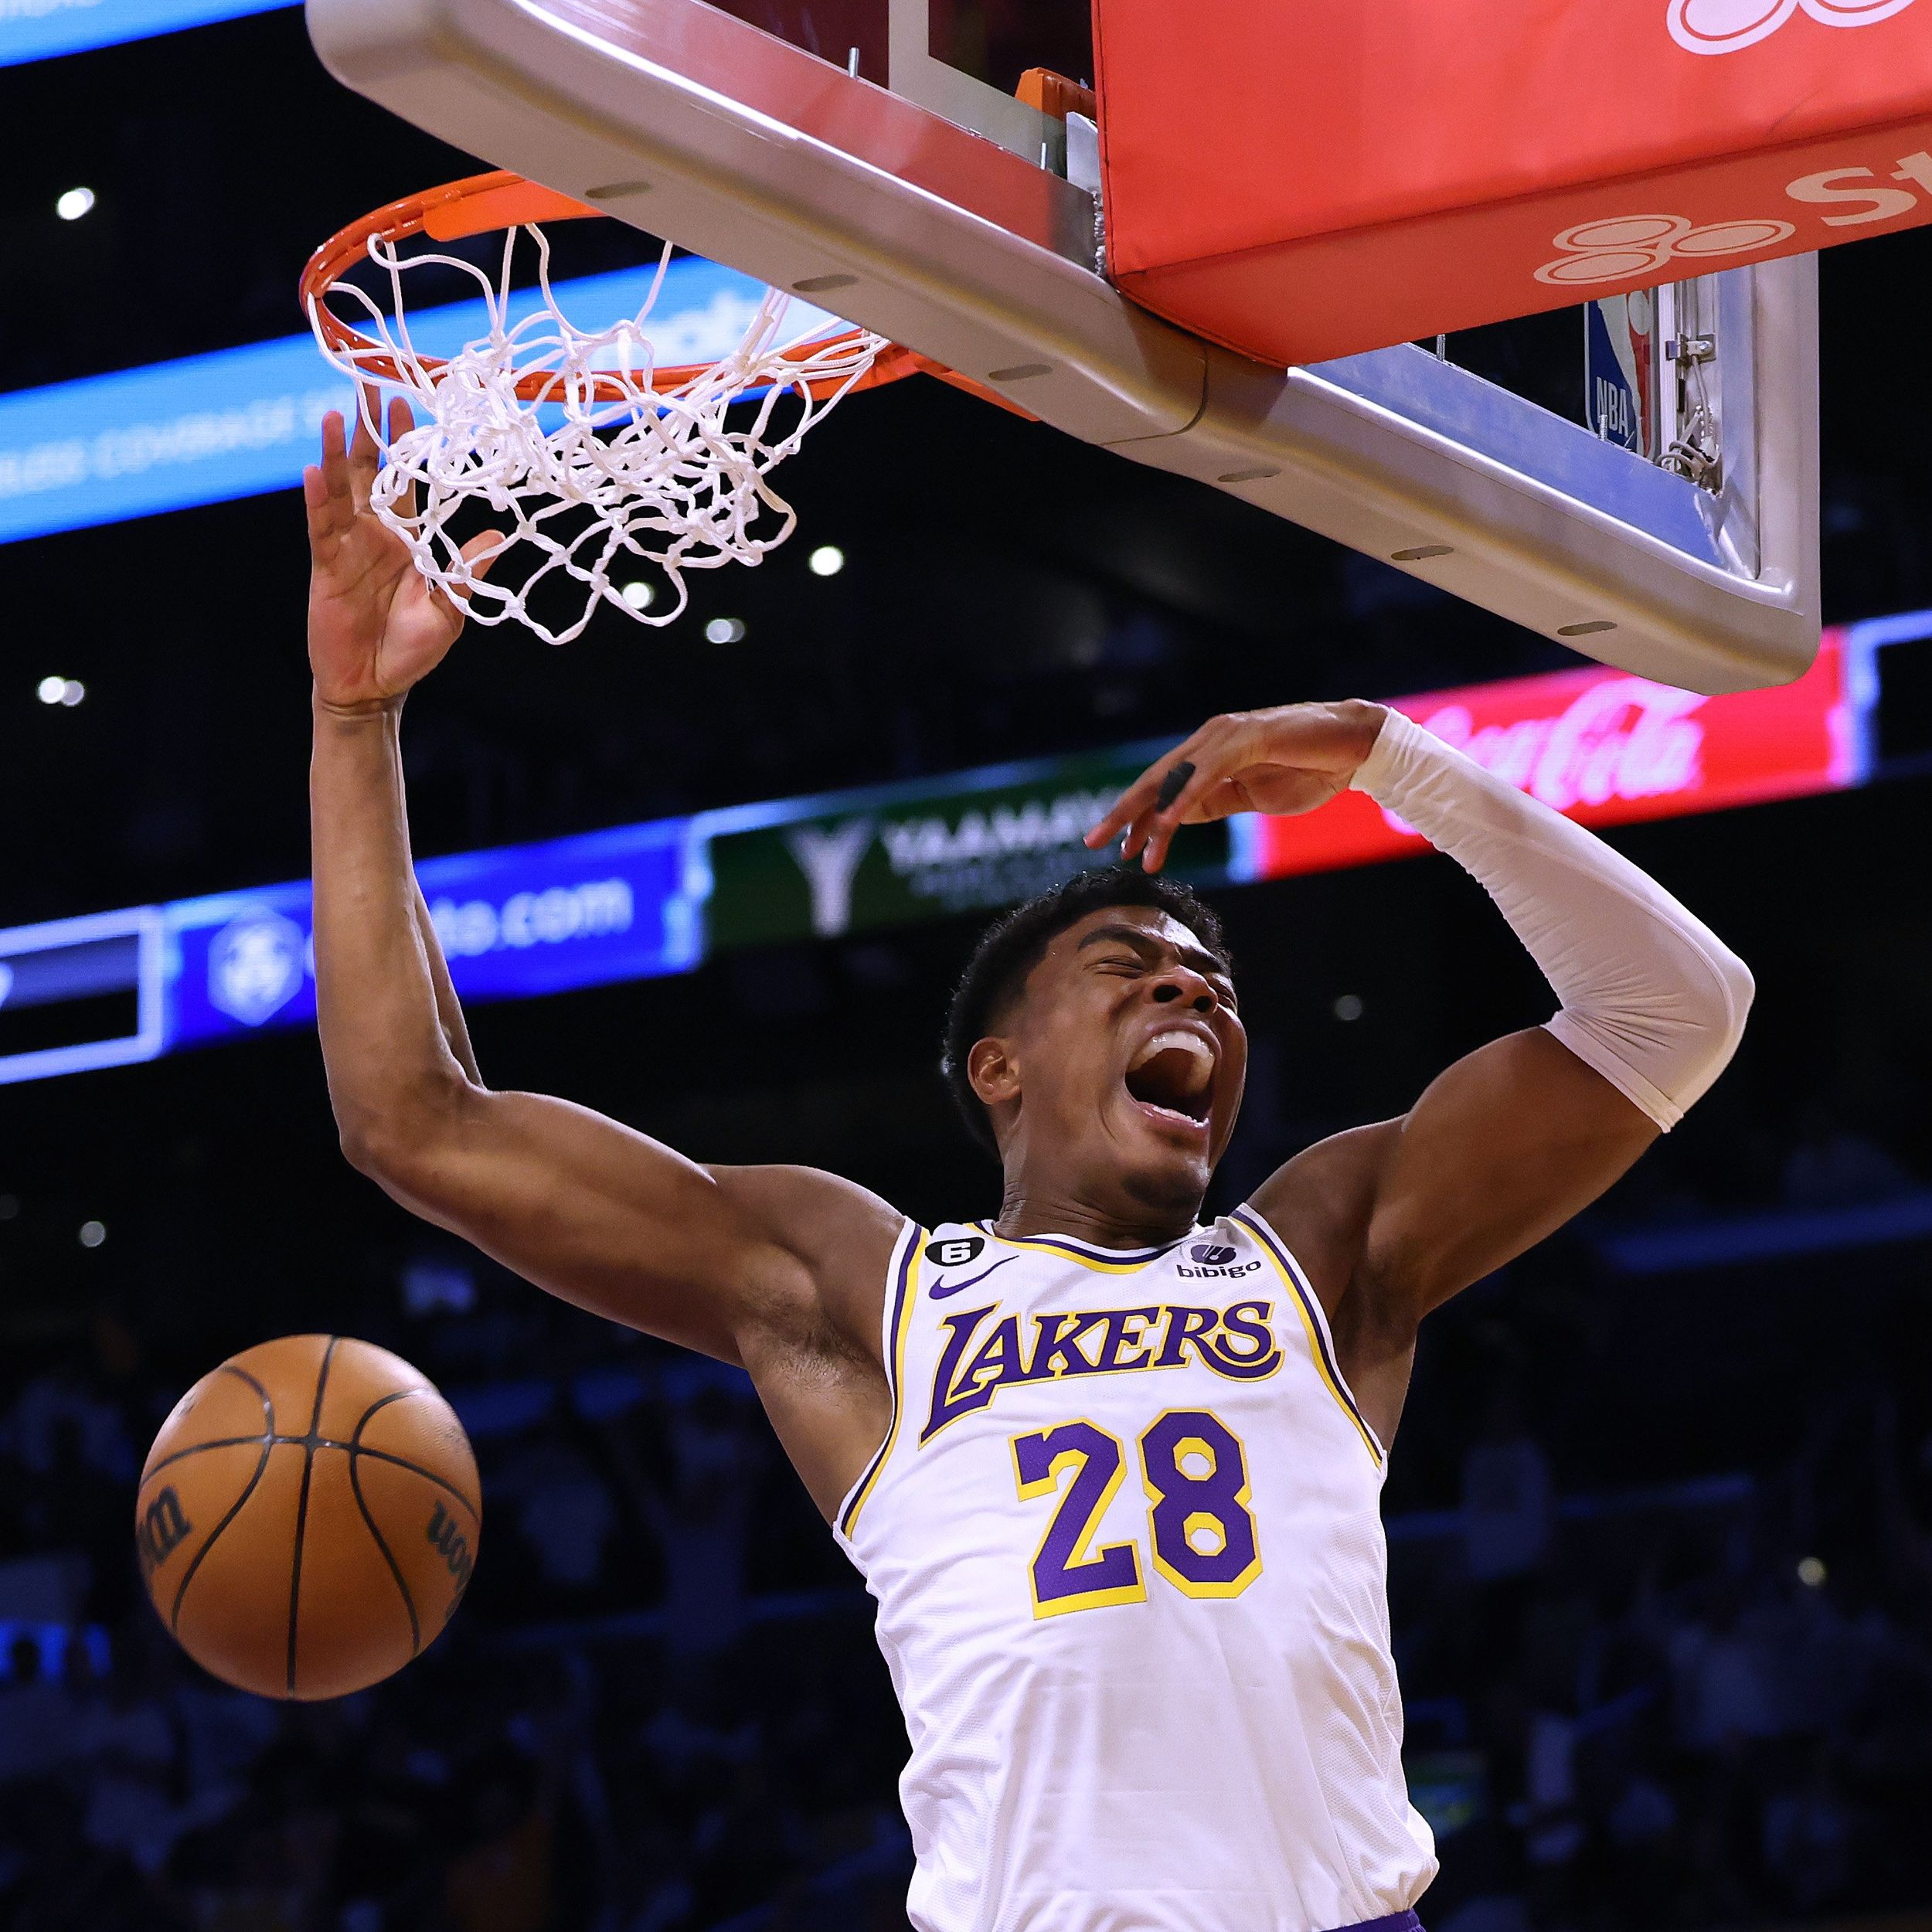 Trade of Rui Hachimura looks a smart one for the Lakers, but